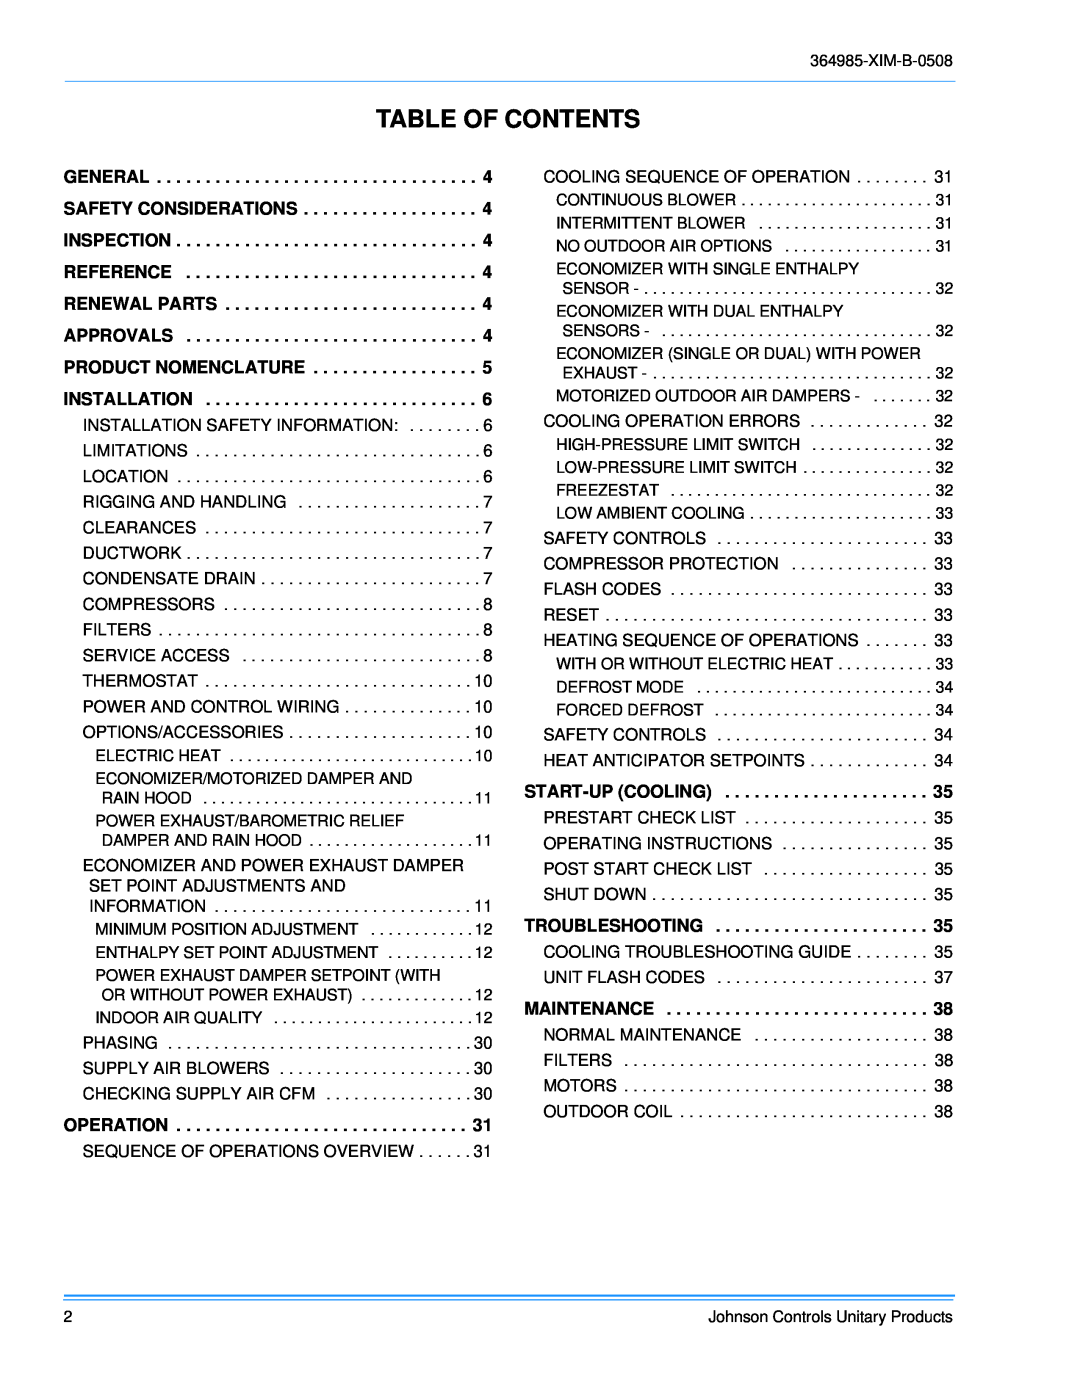 Johnson Controls BQ 048, BQ 060, BQ 036 Table Of Contents, Sequence Of Operations Overview, Cooling Sequence Of Operation 